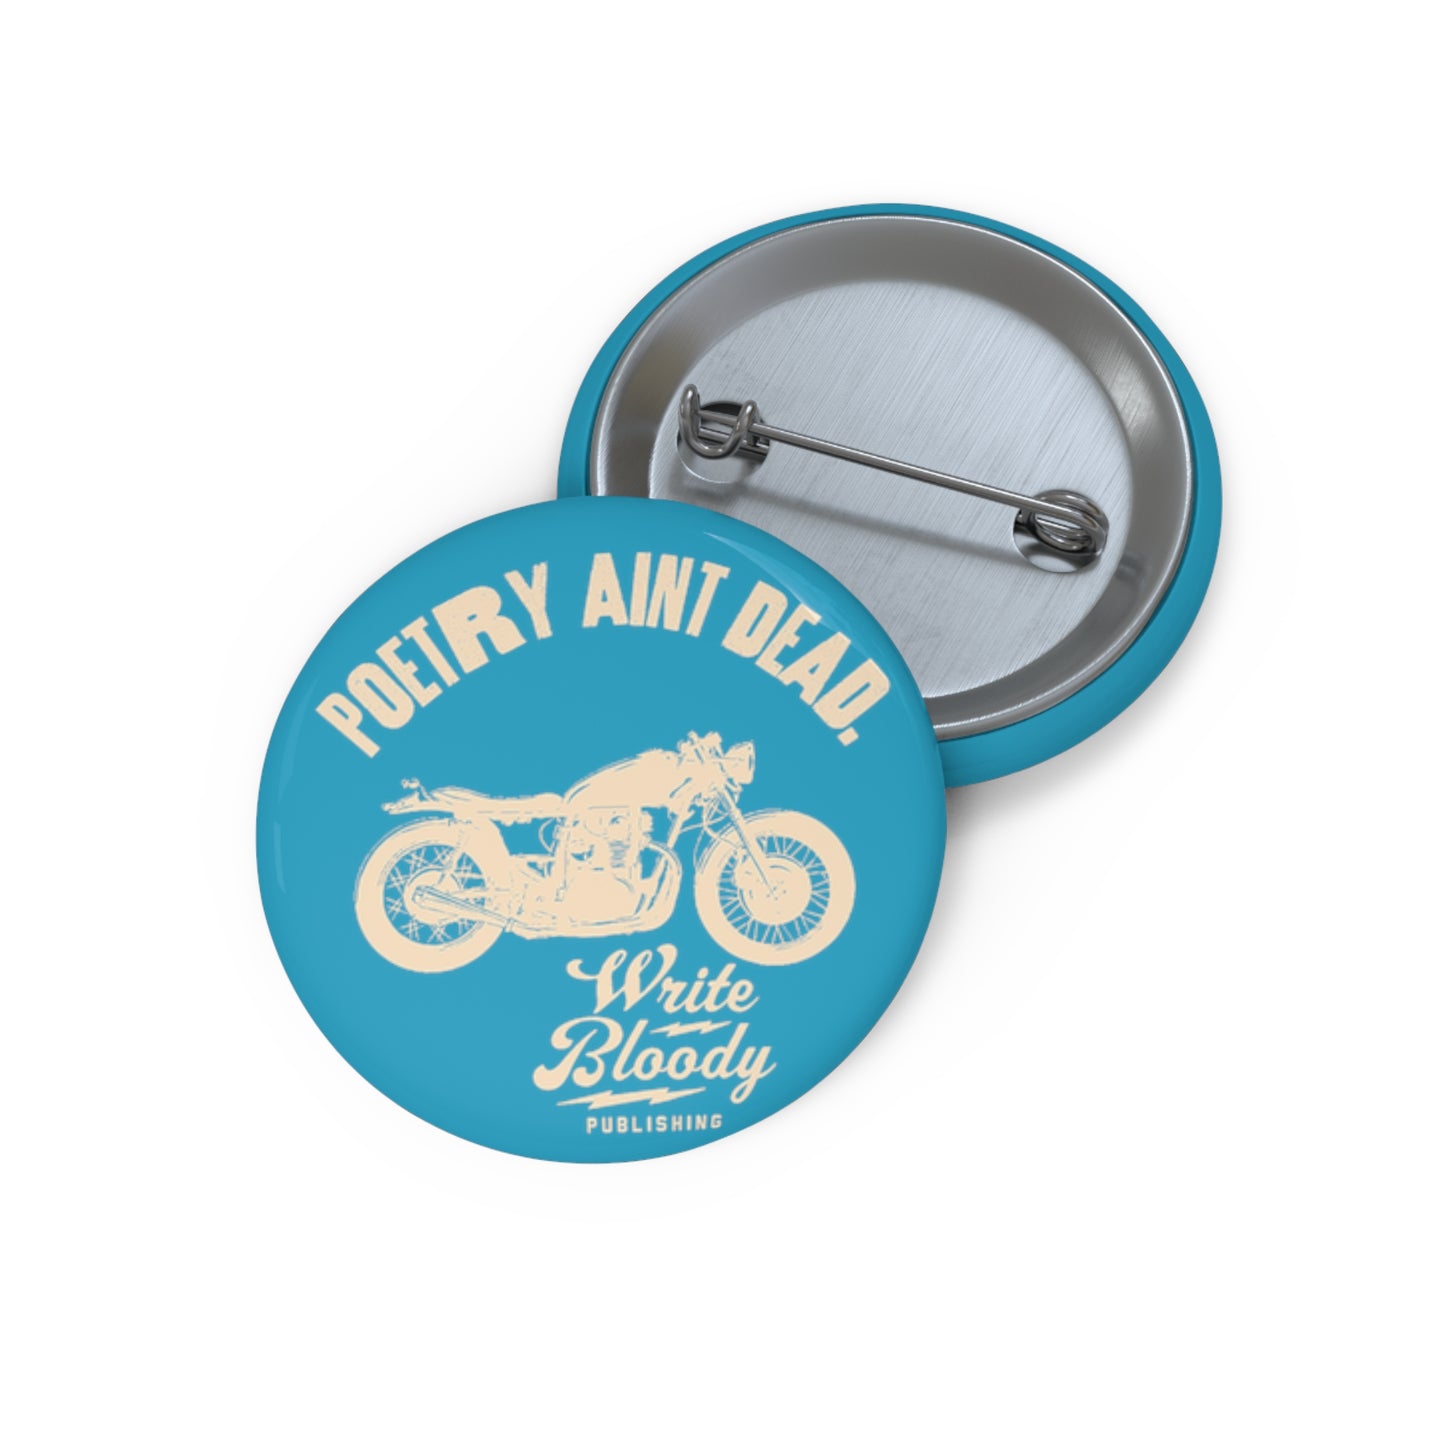 Write Bloody Poetry Aint Dead Moto Pin Buttons